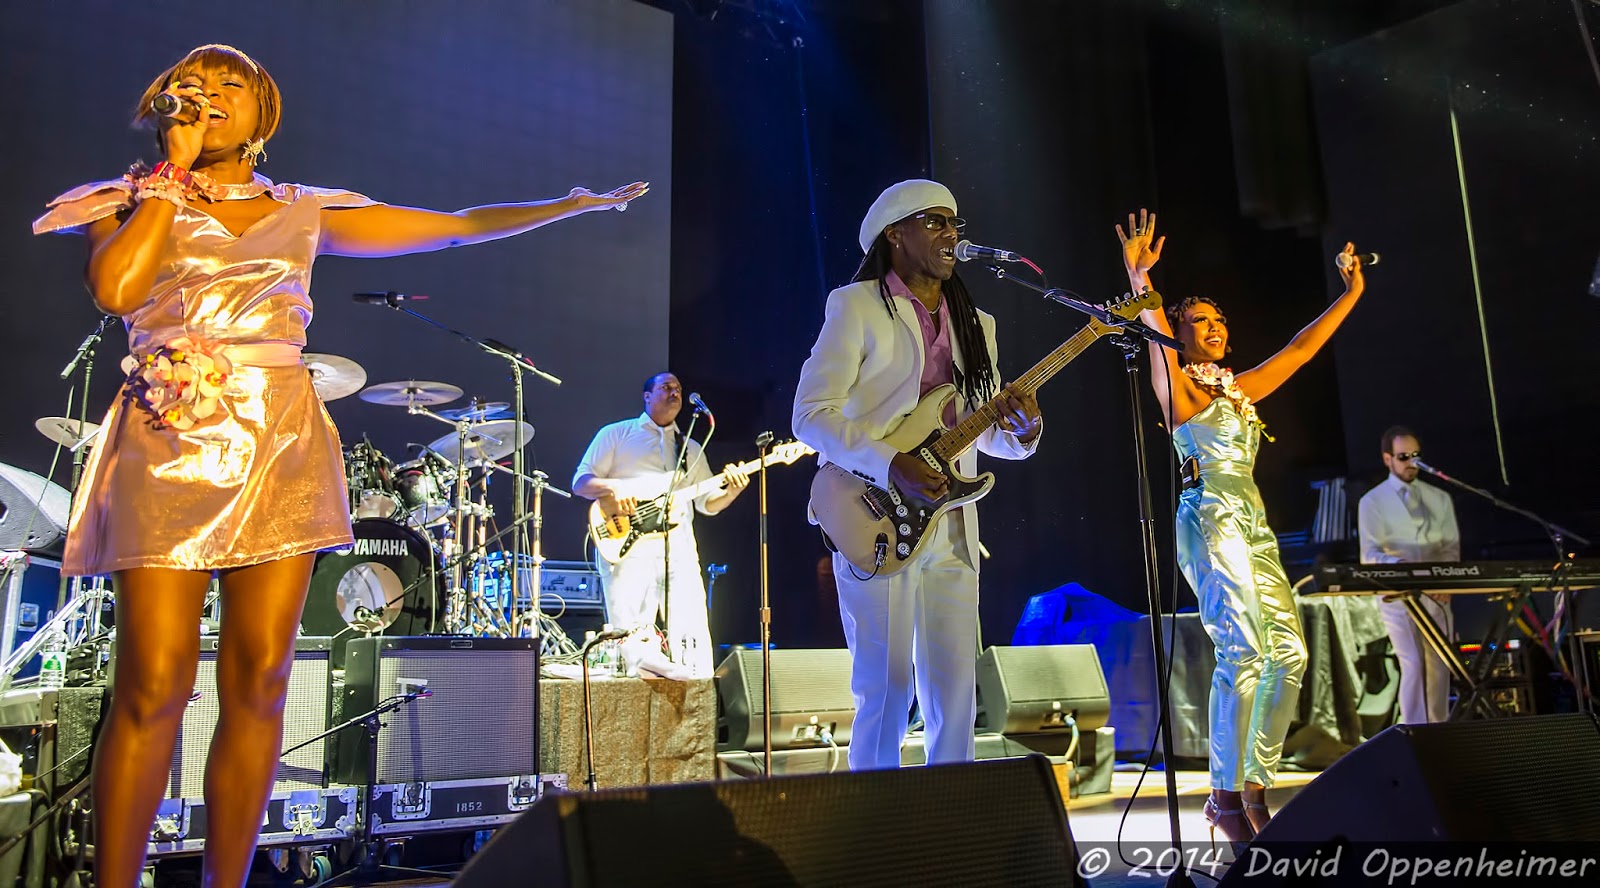 CHIC Ft. Nile Rodgers